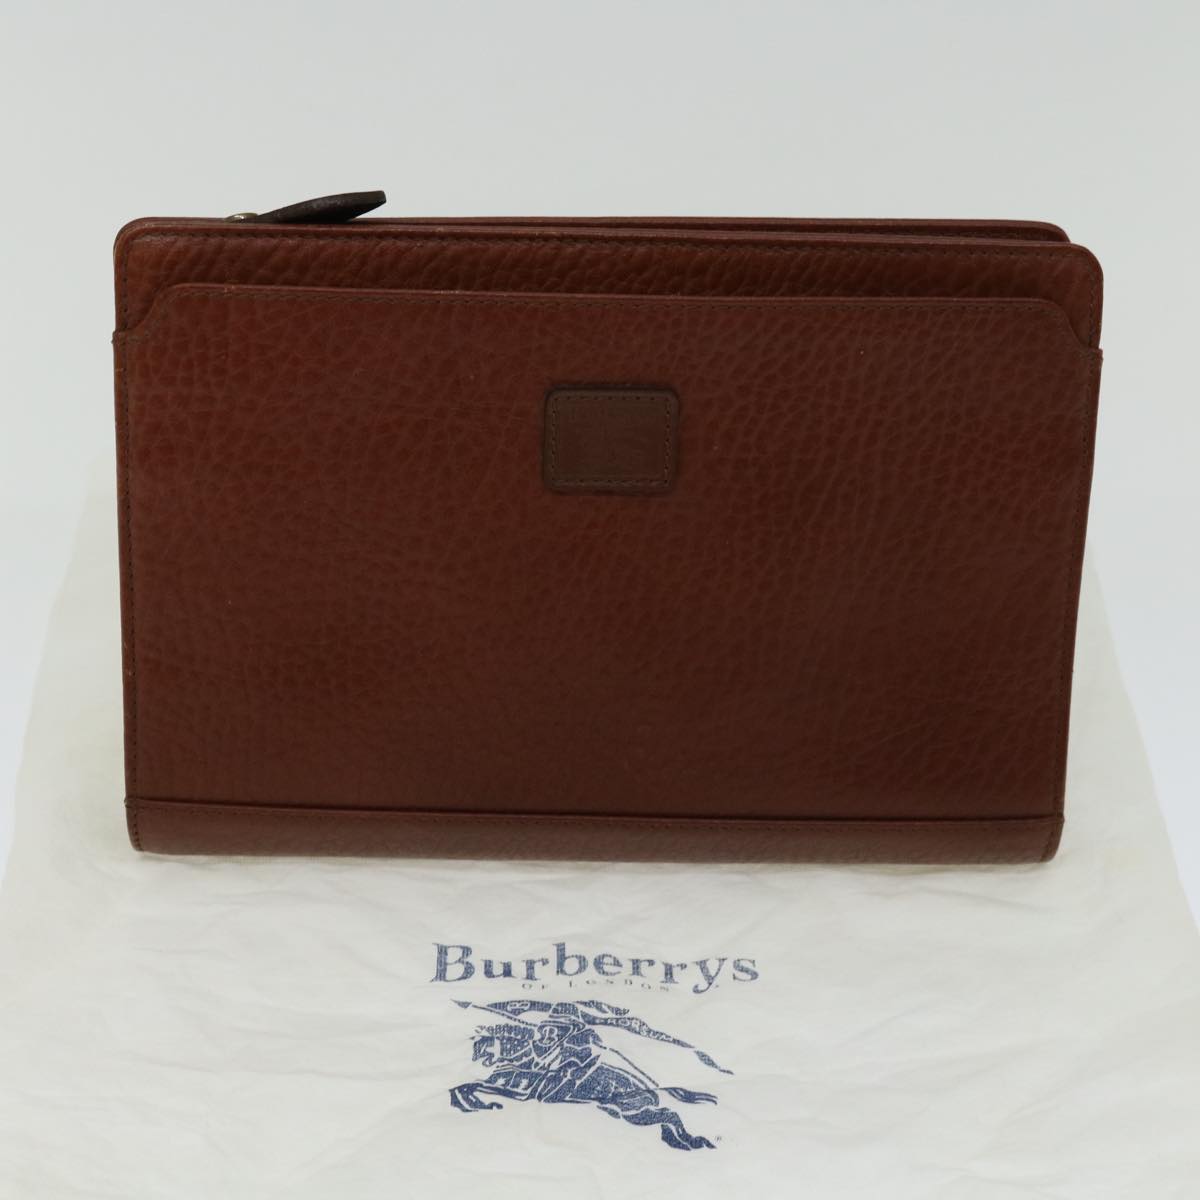 Burberrys Clutch Bag Leather Brown Auth bs12180